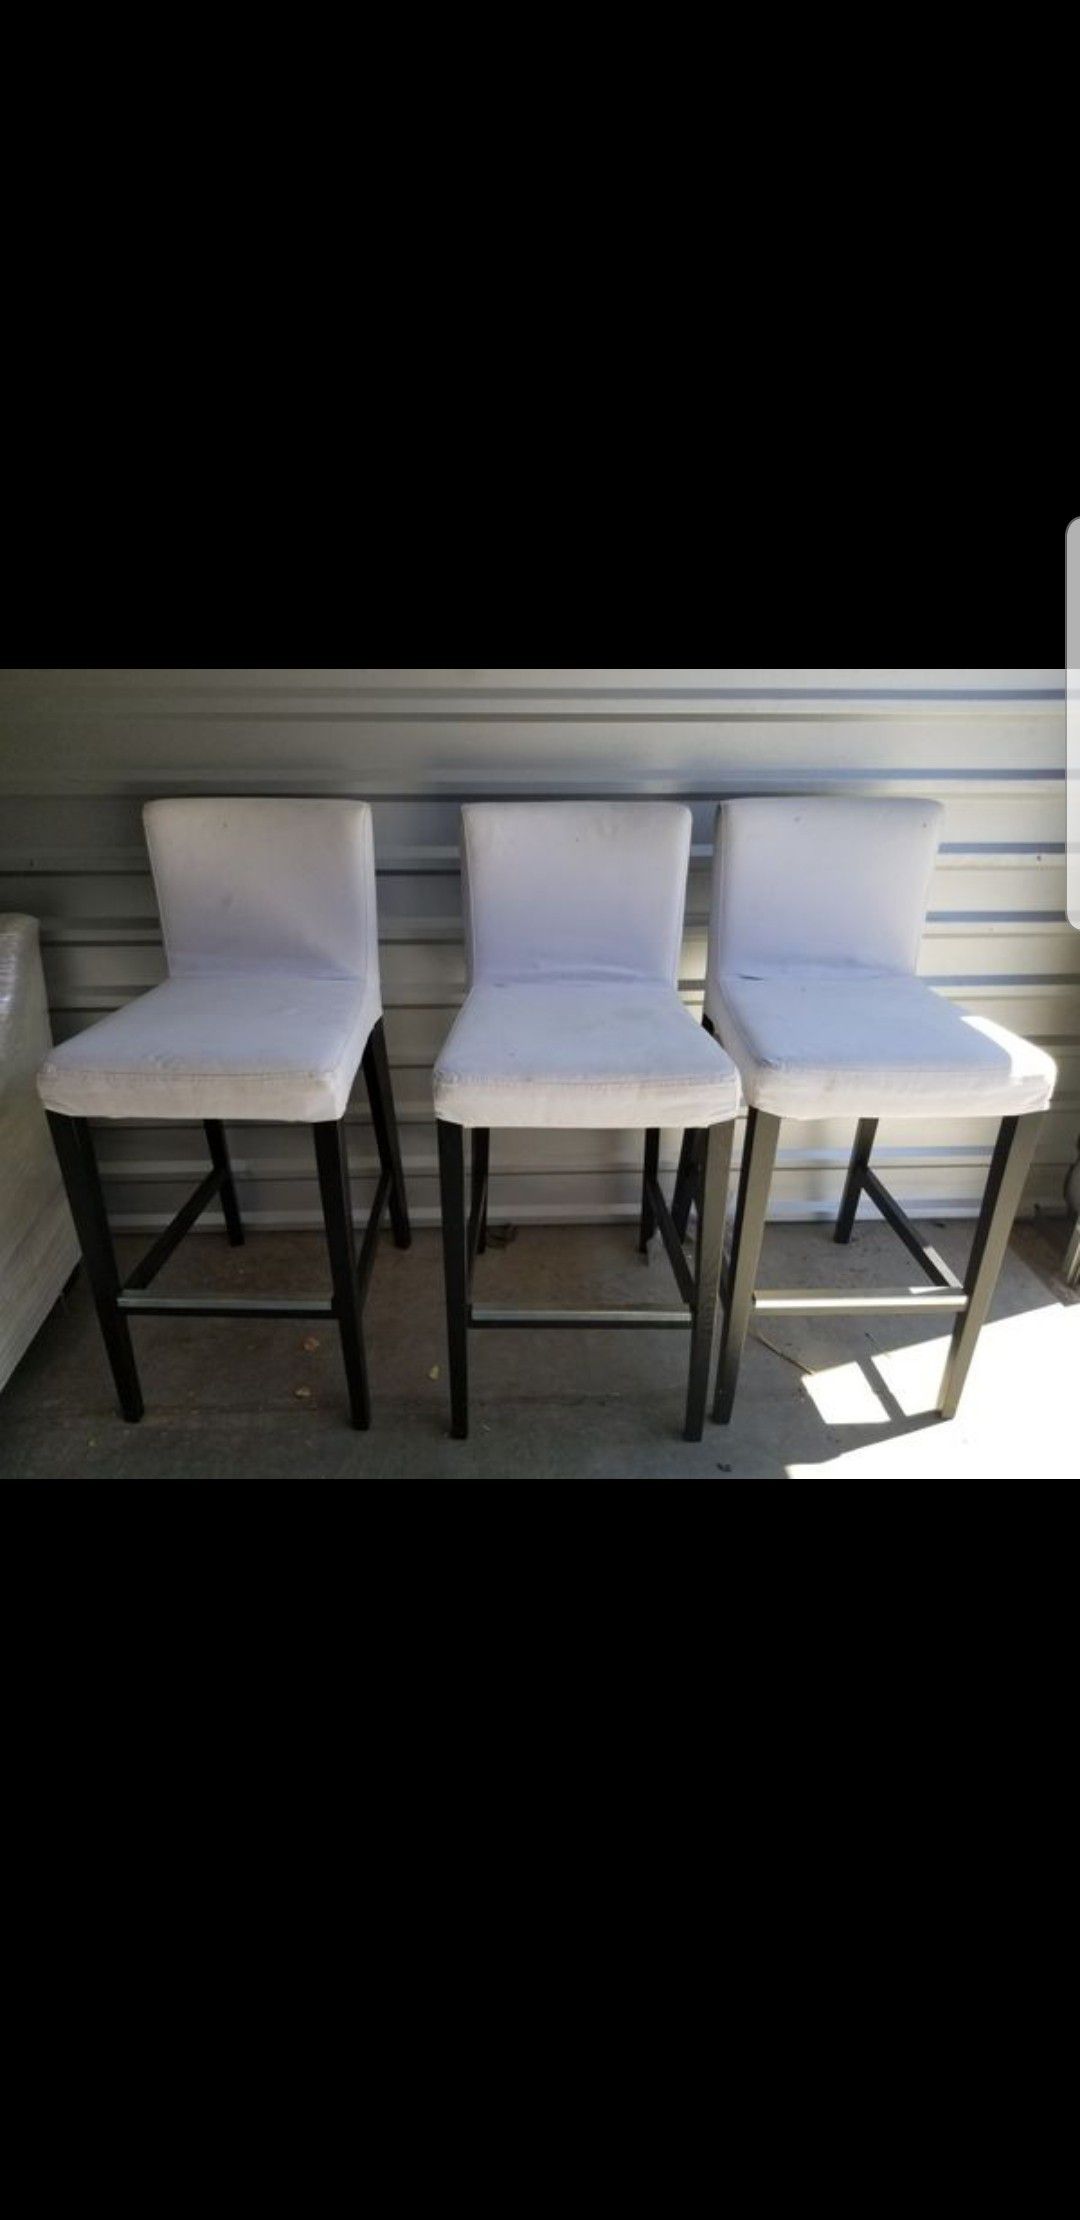 Three bar stool height chairs, comfortable, covers come off and can be washed. Asking $100